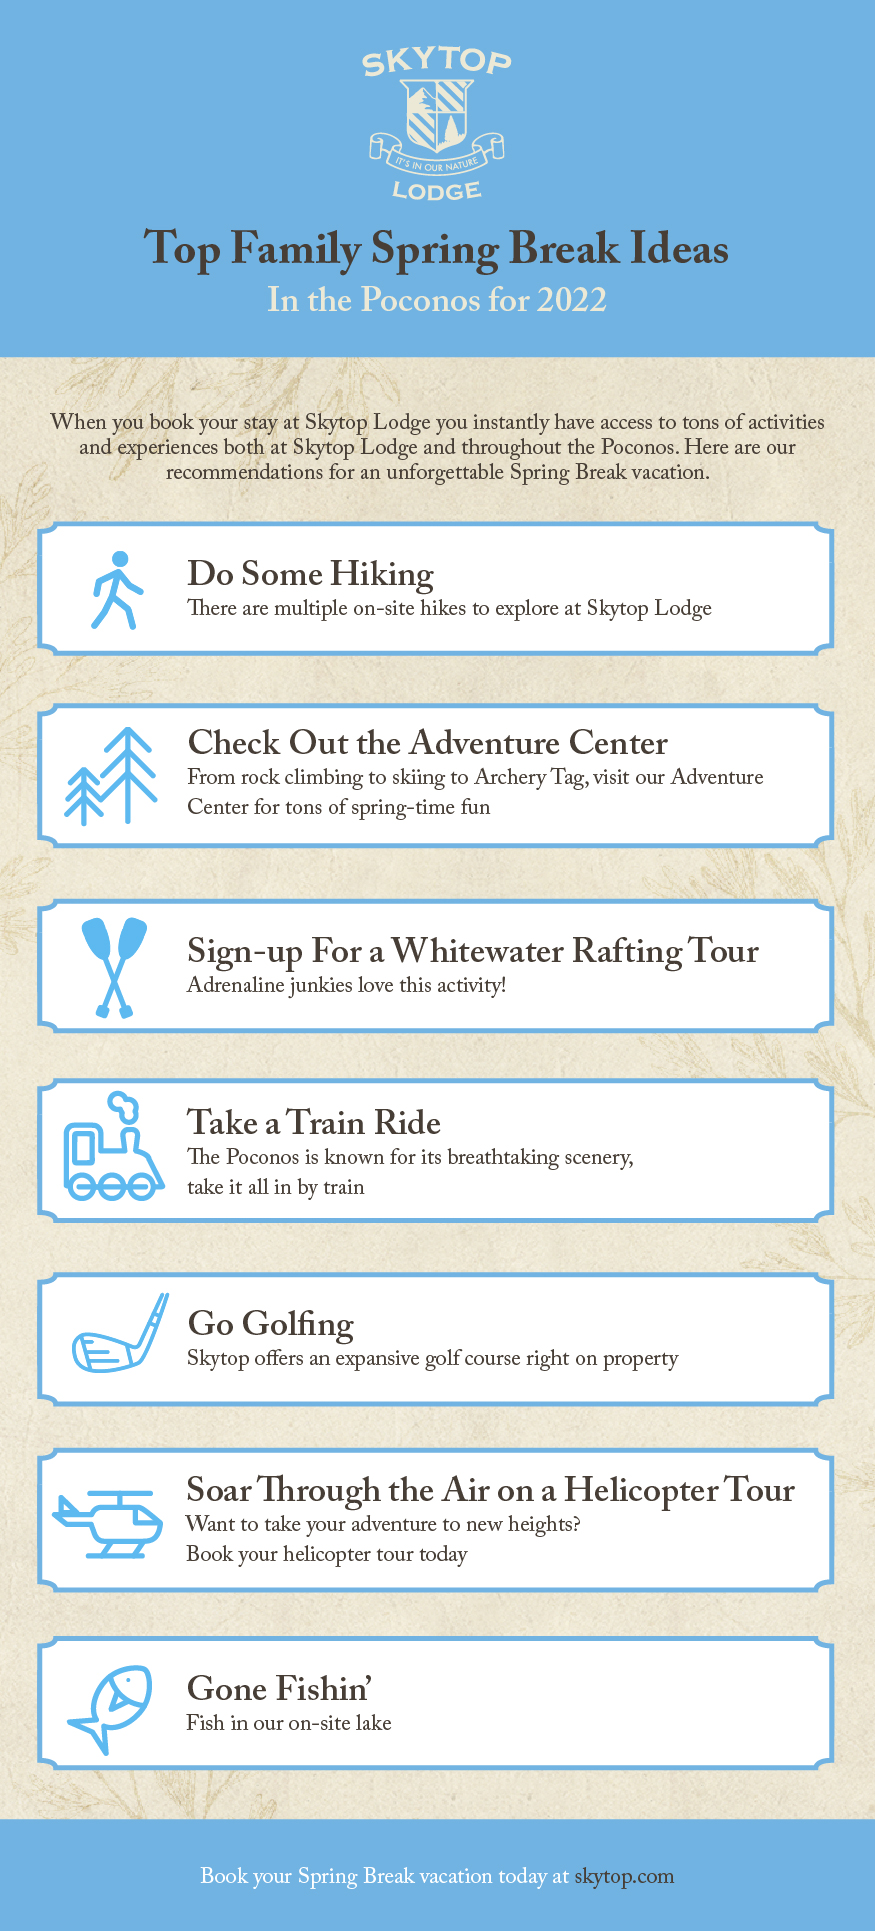 Top Family Spring Break Ideas in the Poconos for 2022 infographic